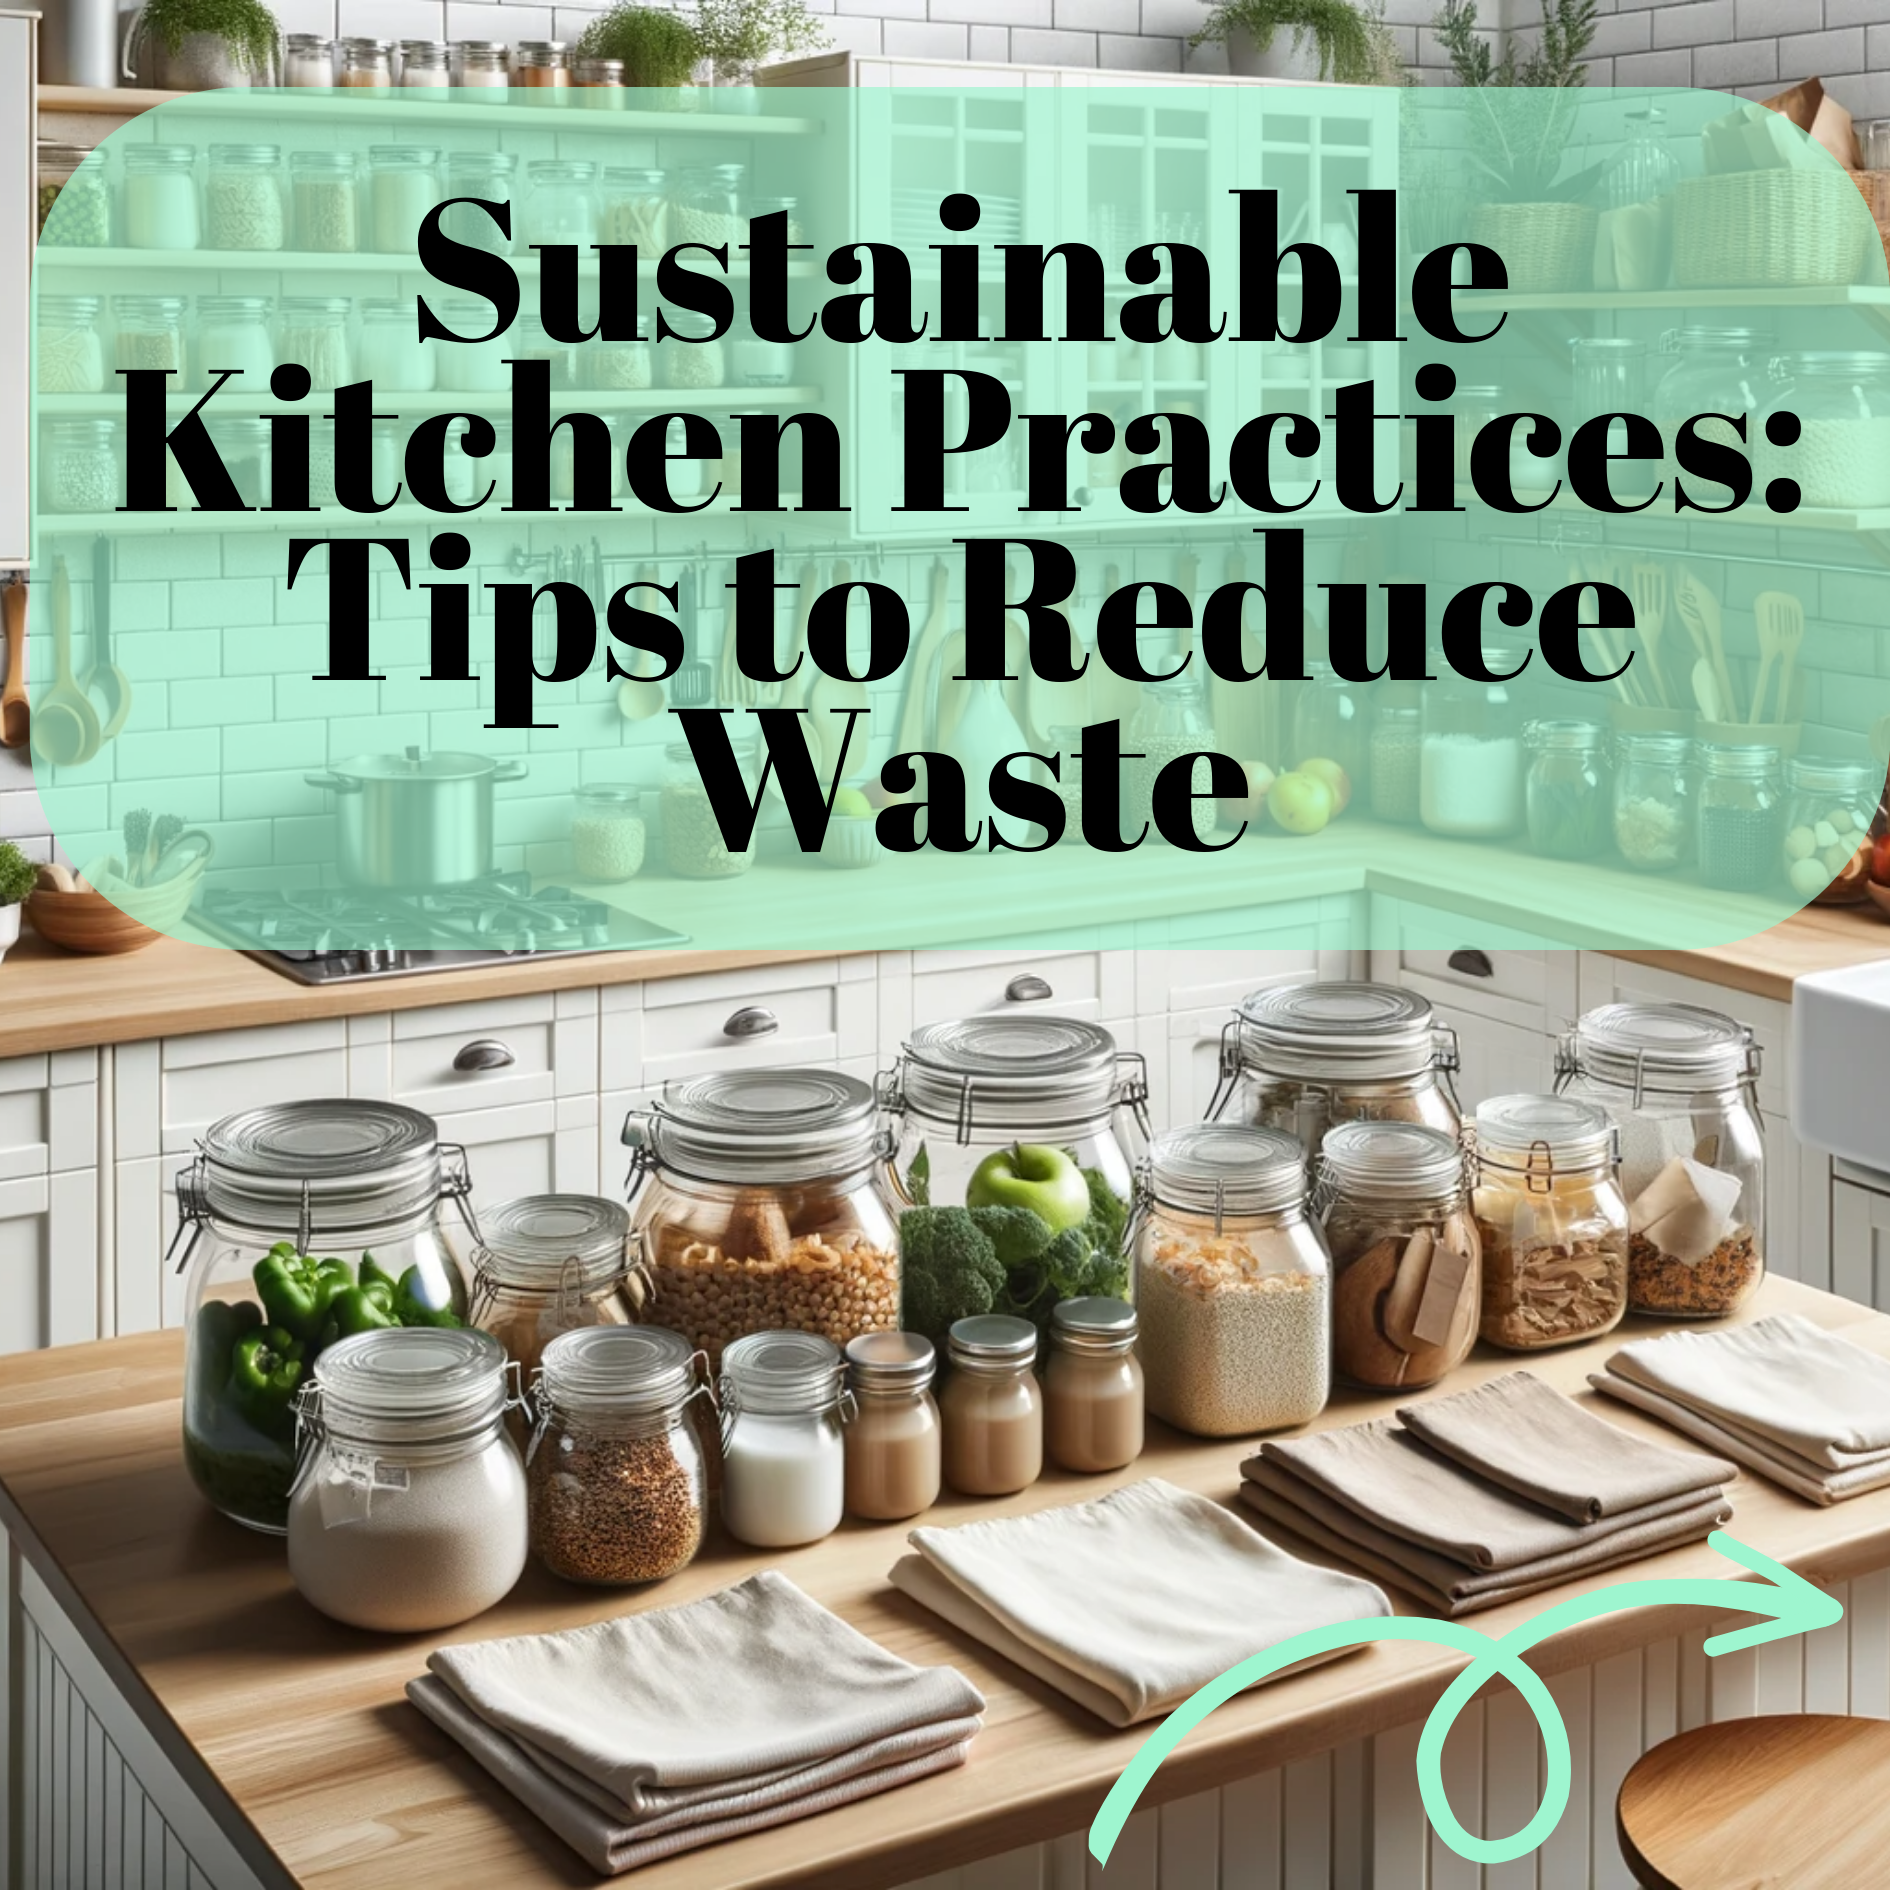 Simple Ways to Make Your Kitchen Greener and Cleaner! 🌿